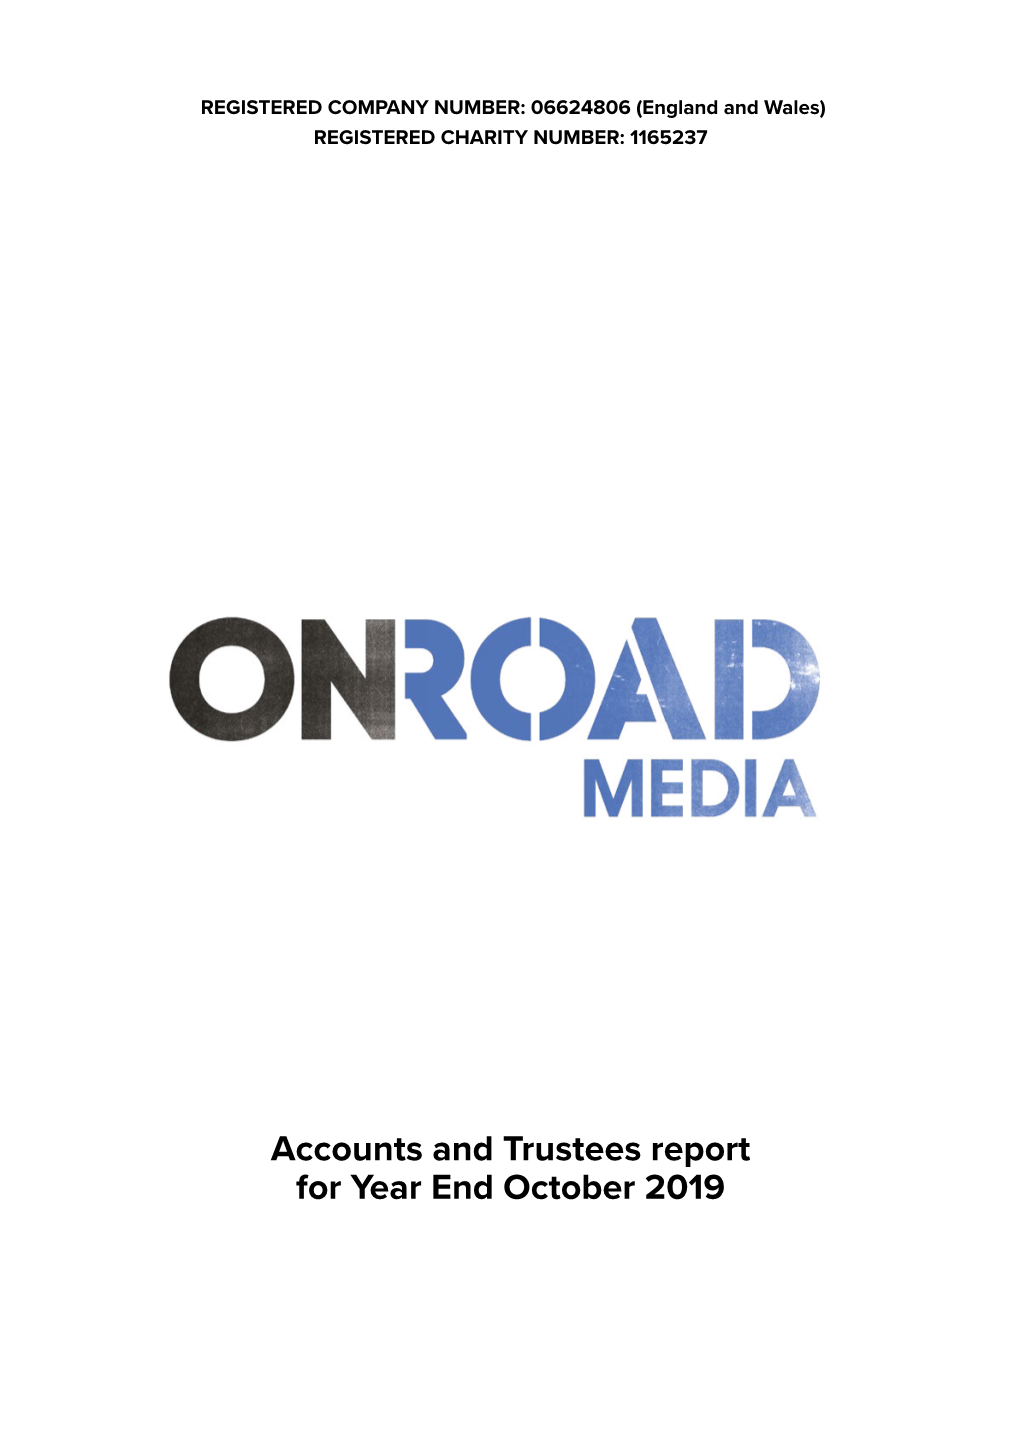 Download on Road's Annual Report for Year-End October 2019